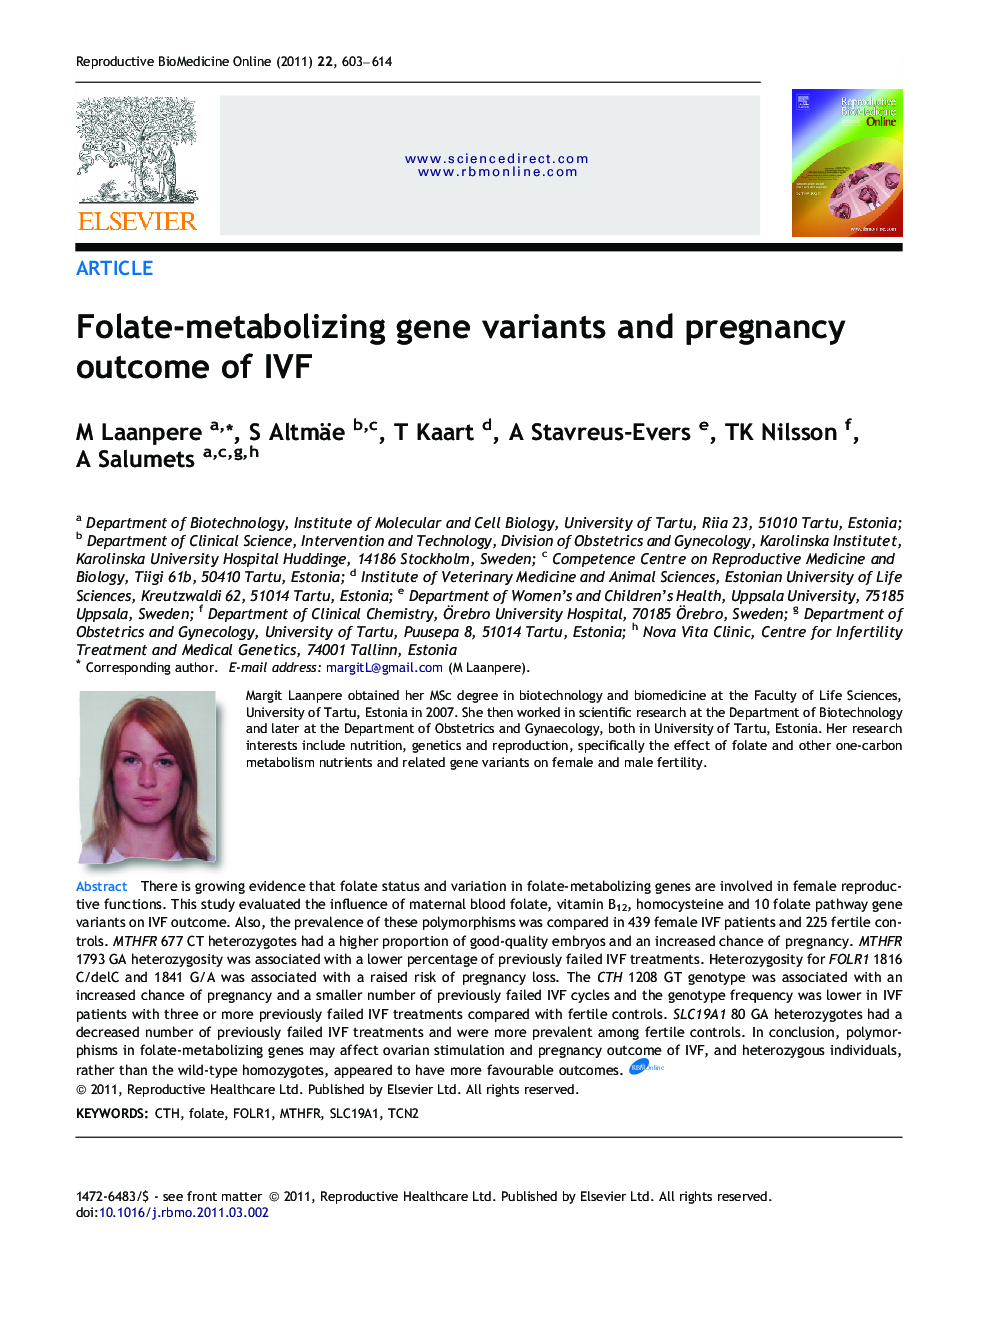 Folate-metabolizing gene variants and pregnancy outcome of IVF 